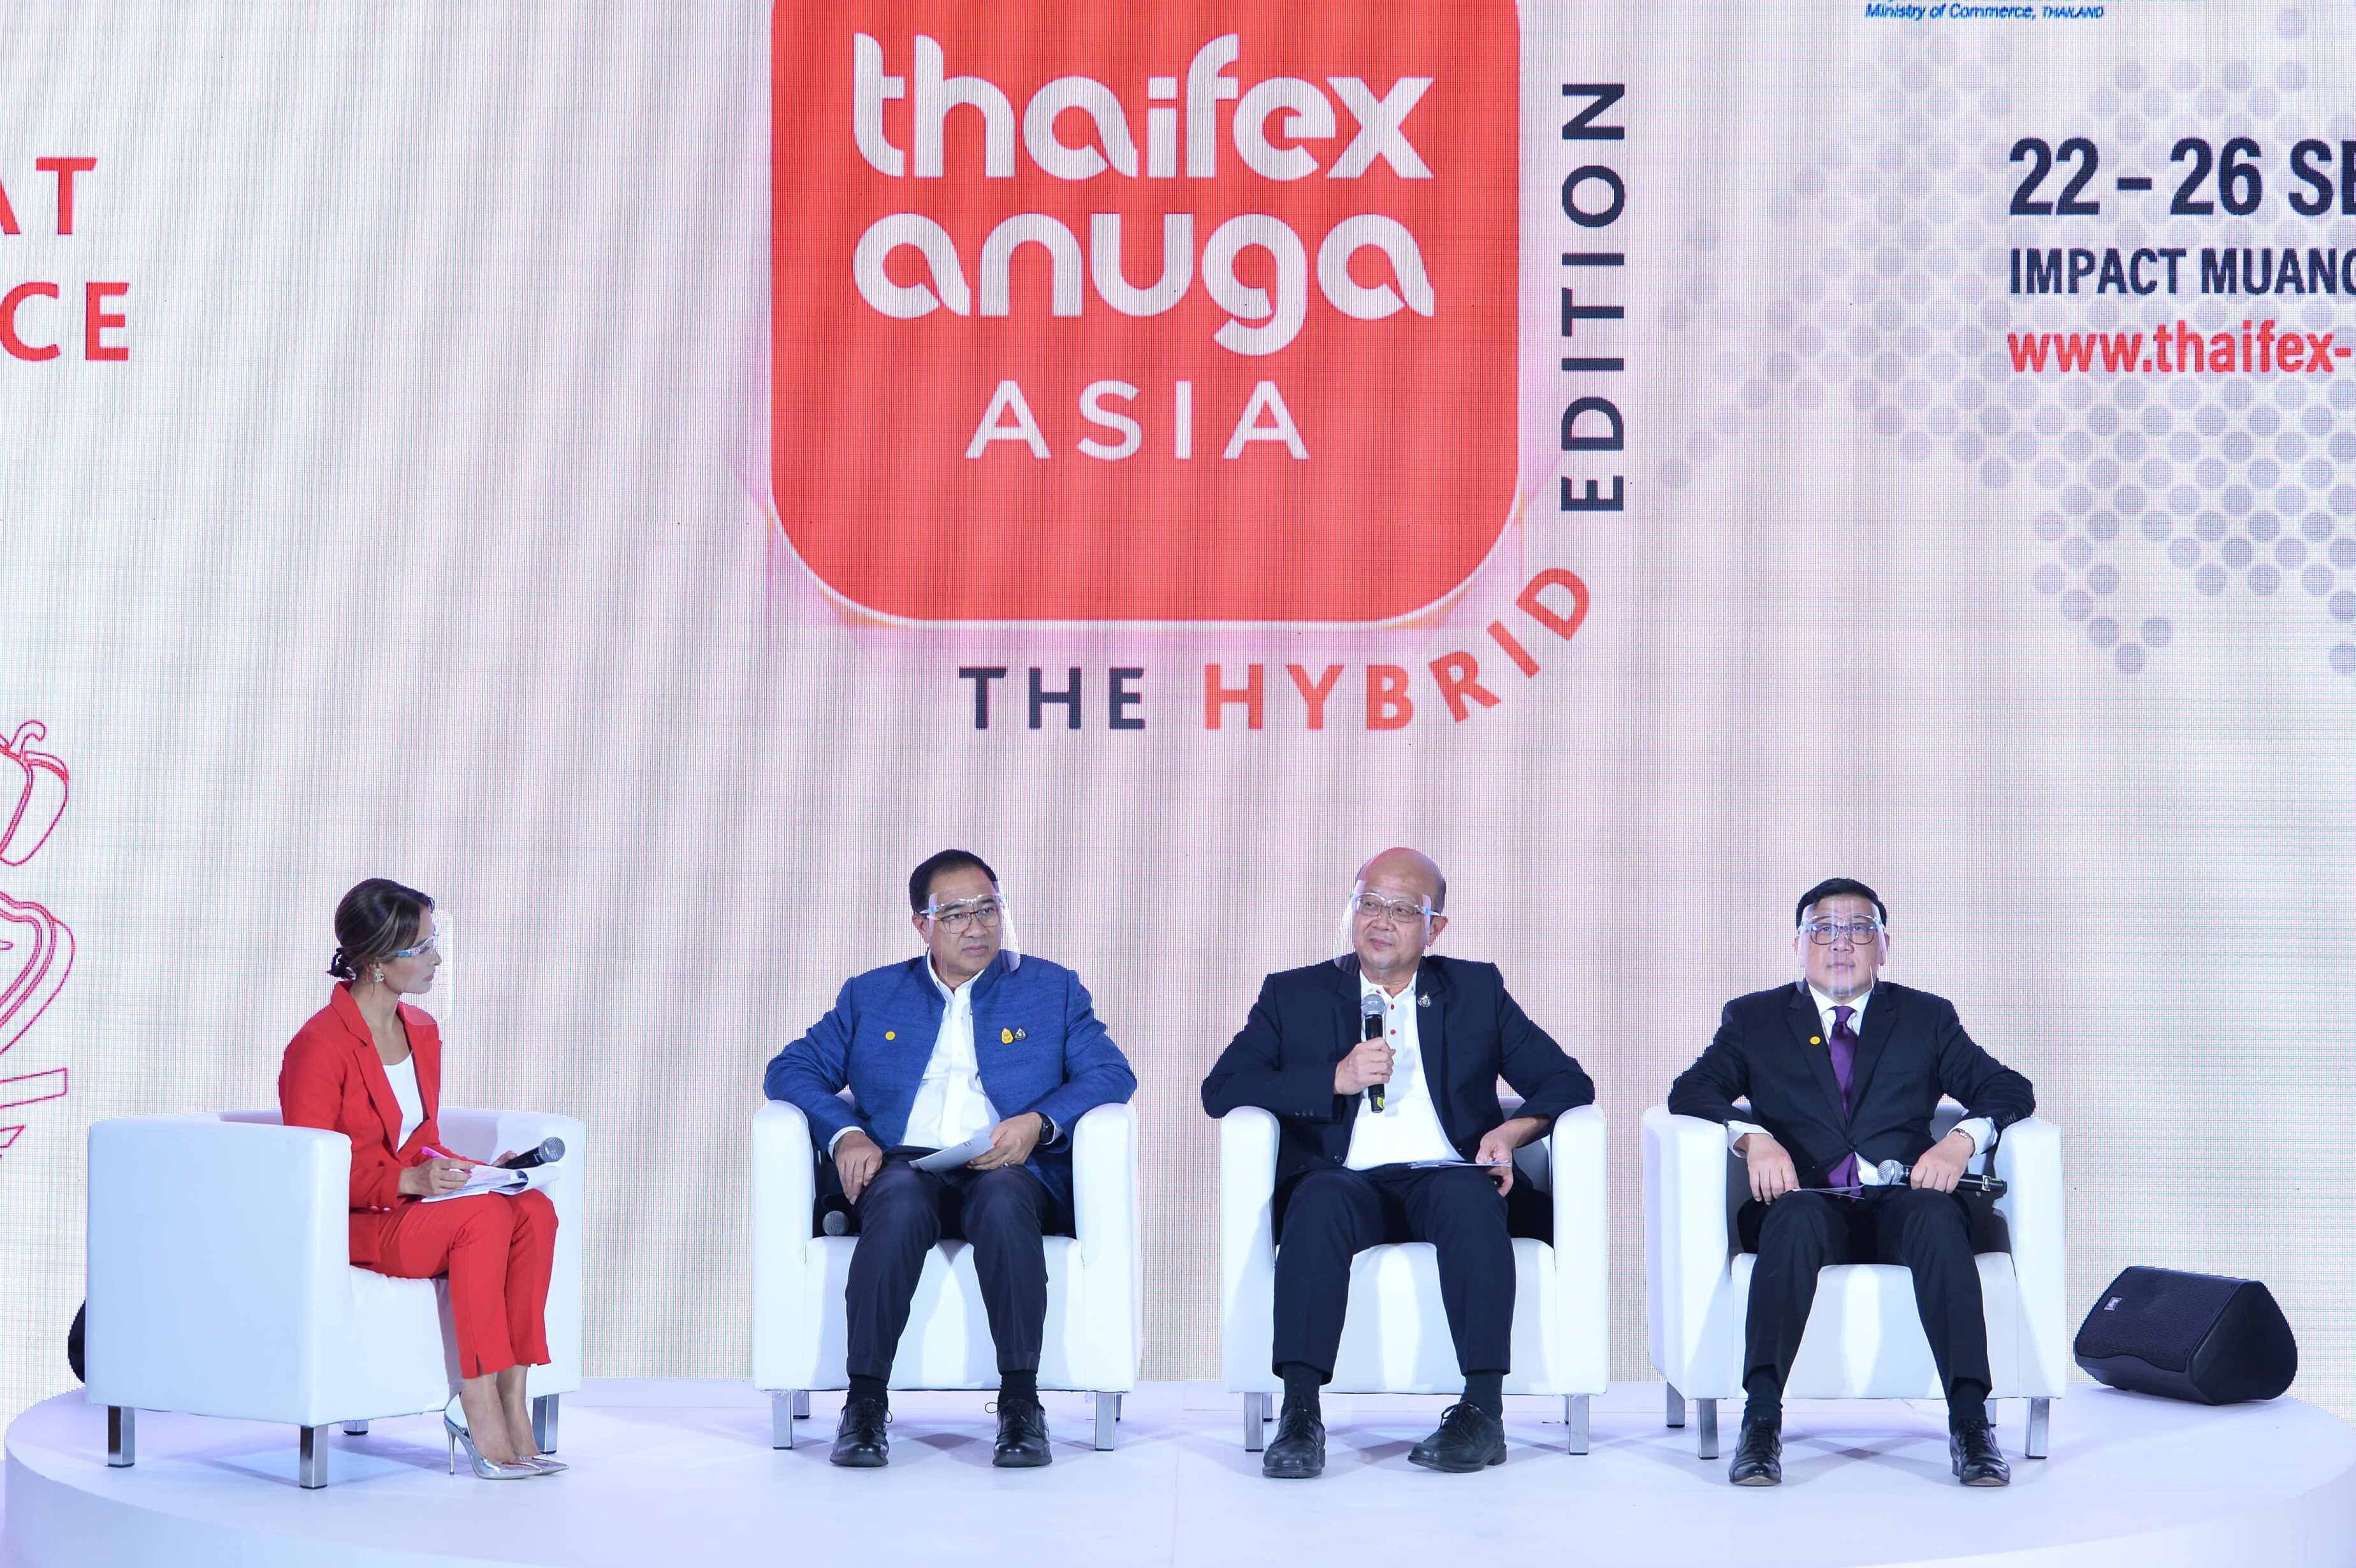 DITP, Thai Chamber of Commerce and Koelnmesse Affirm to Hold “THAIFEX - ANUGA ASIA 2020” in “The Hybrid Edition” of Tradeshow